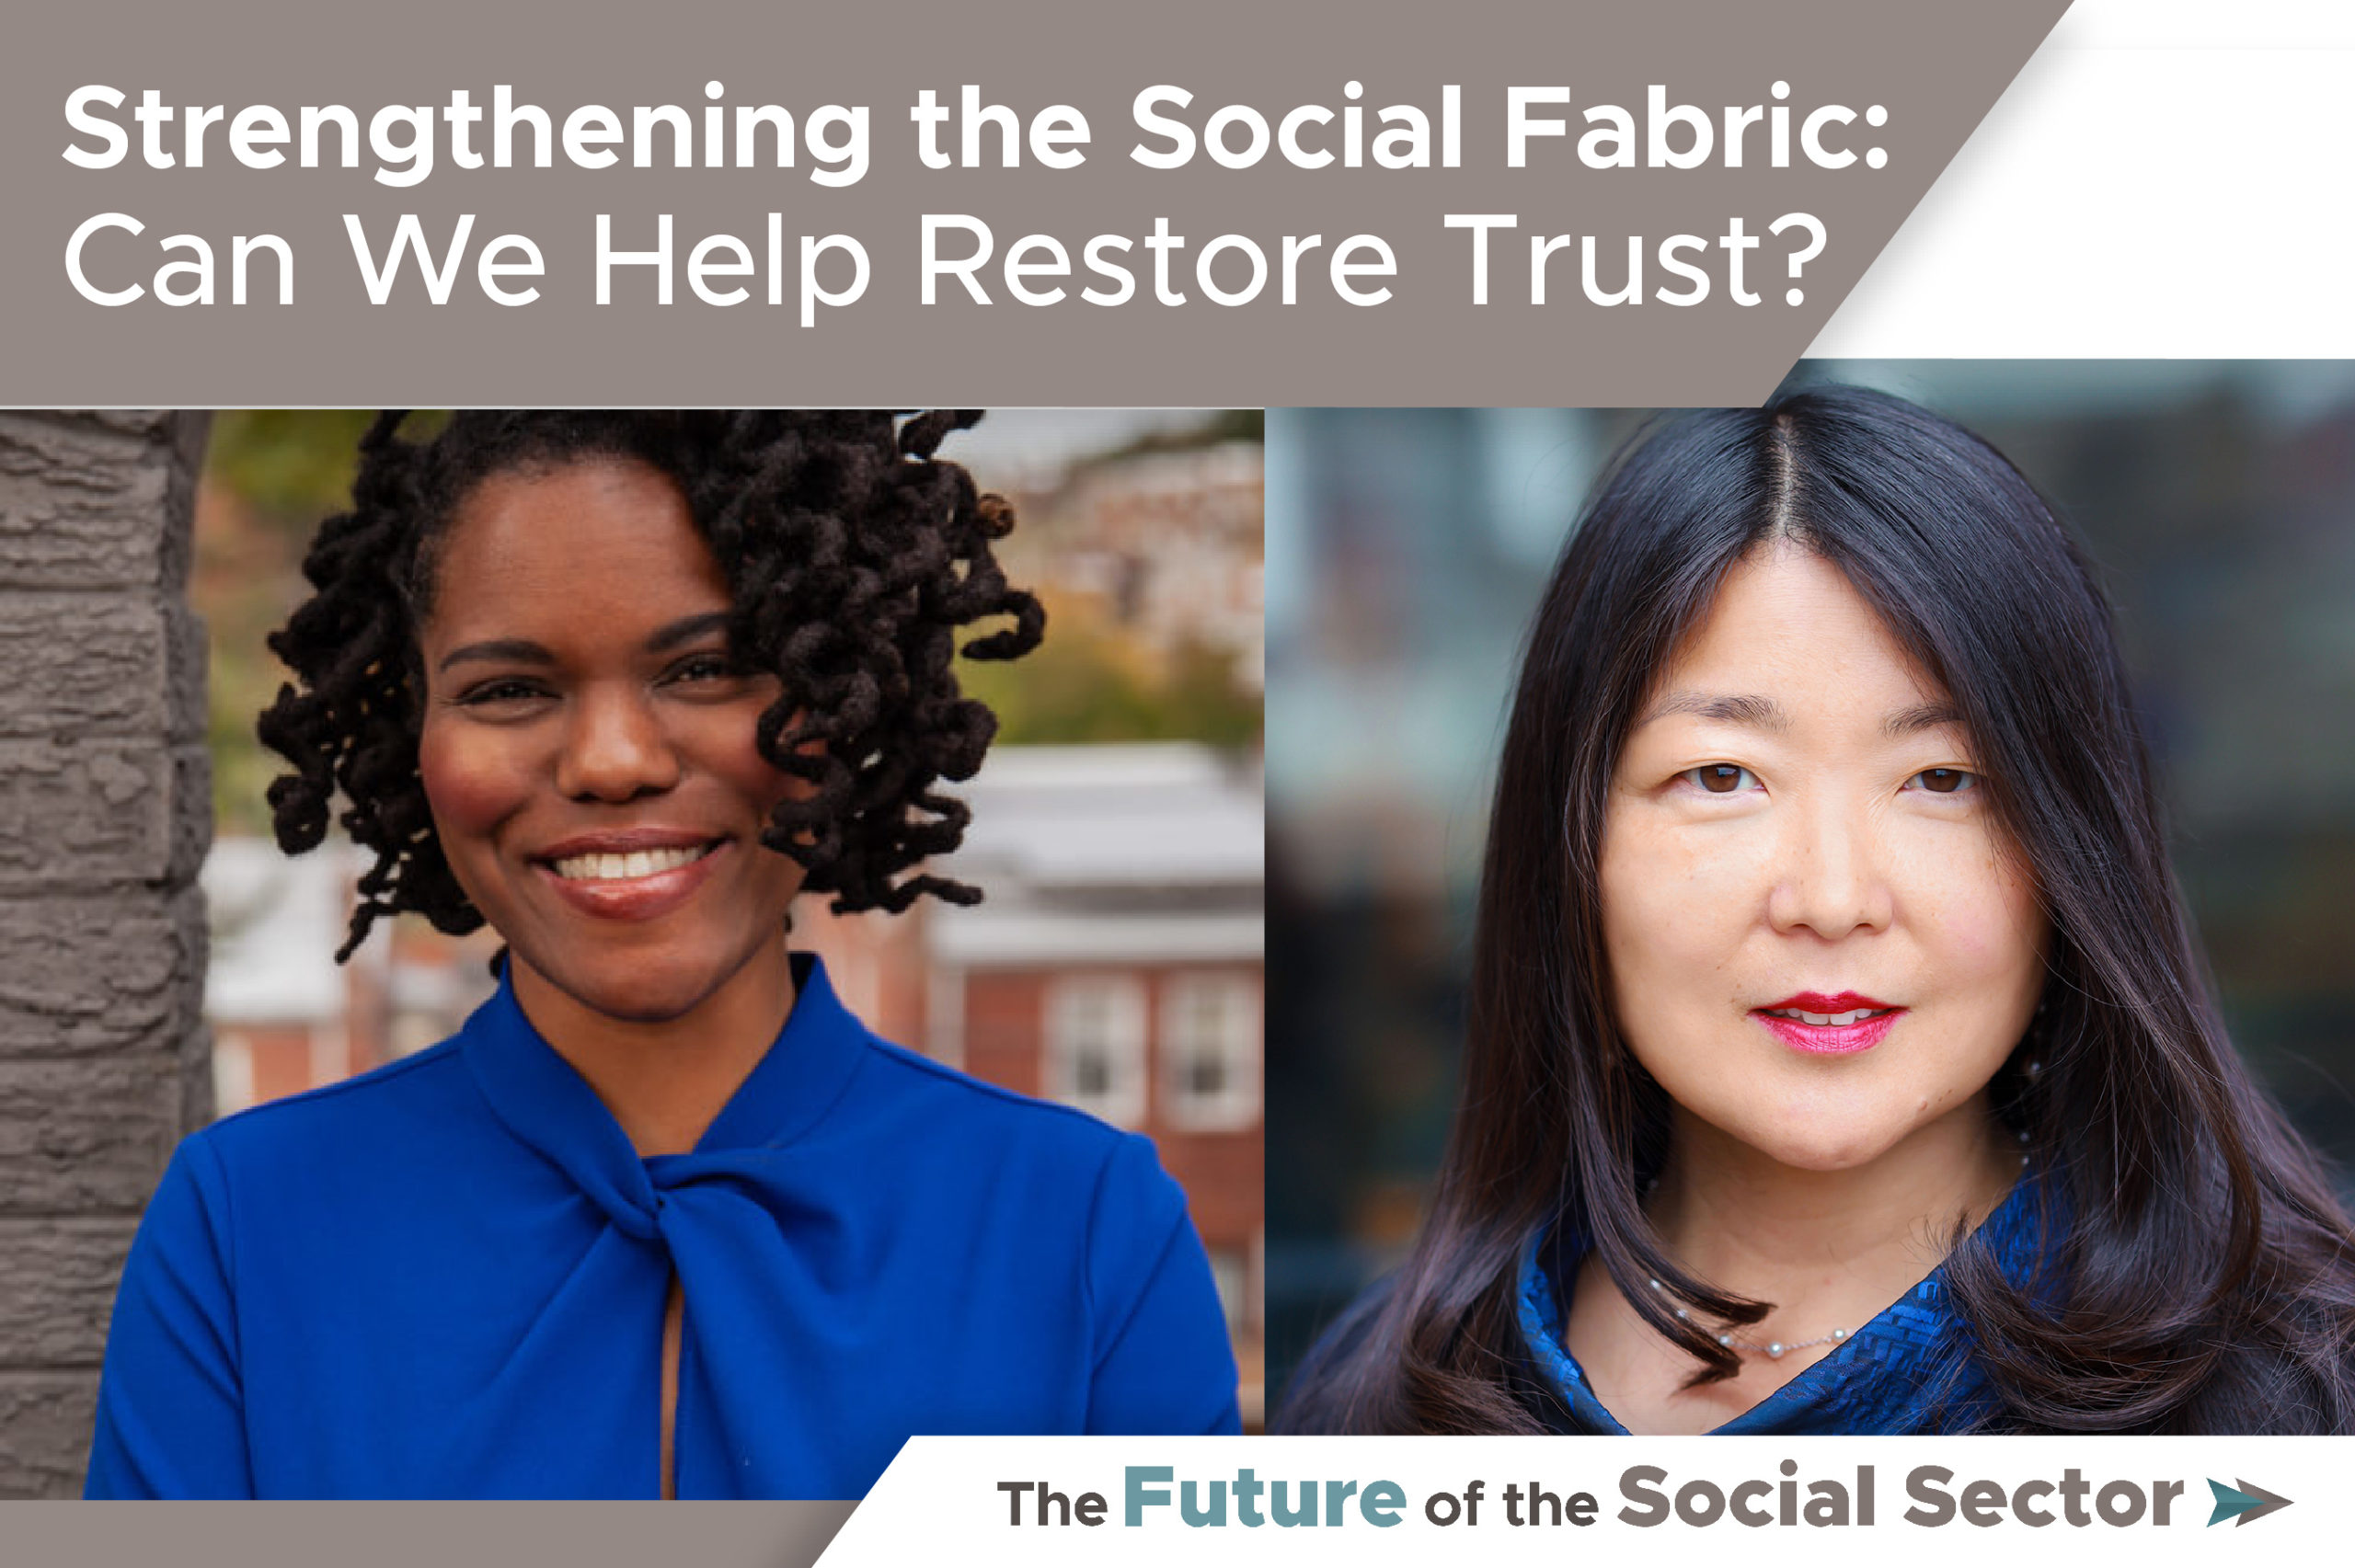 Strengthening the Social Fabric: Can the Social Sector Help Restore Trust?